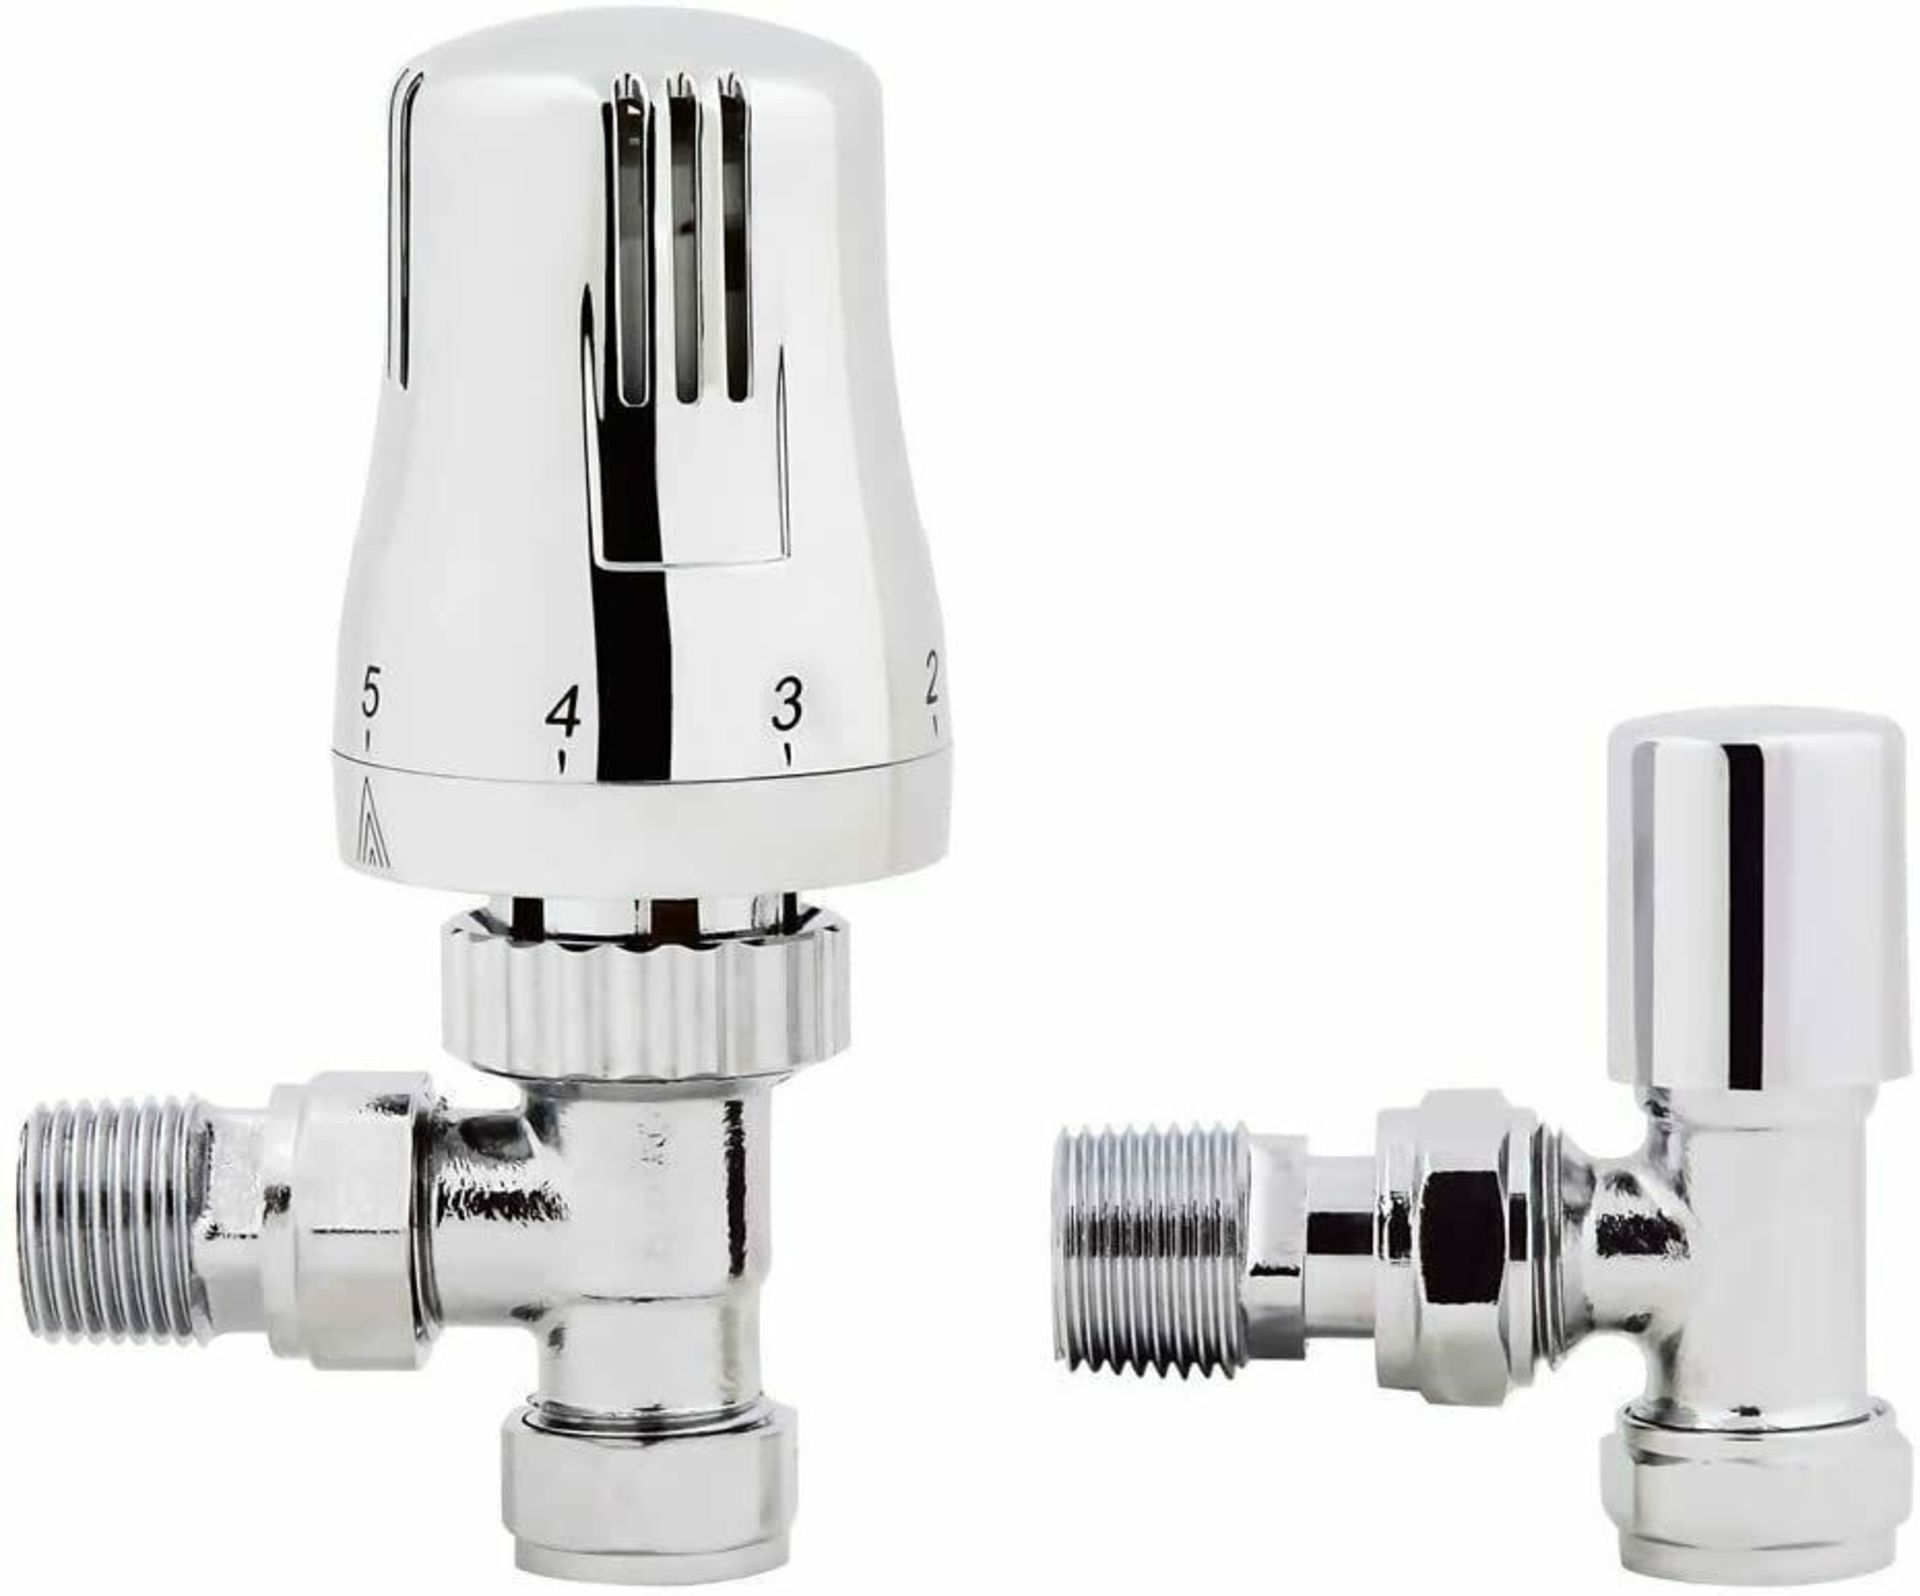 NEW & BOXED Chrome Thermostatic Control Angled Designer Radiator Valves Pair 15mm ®" NEW. RRP ...